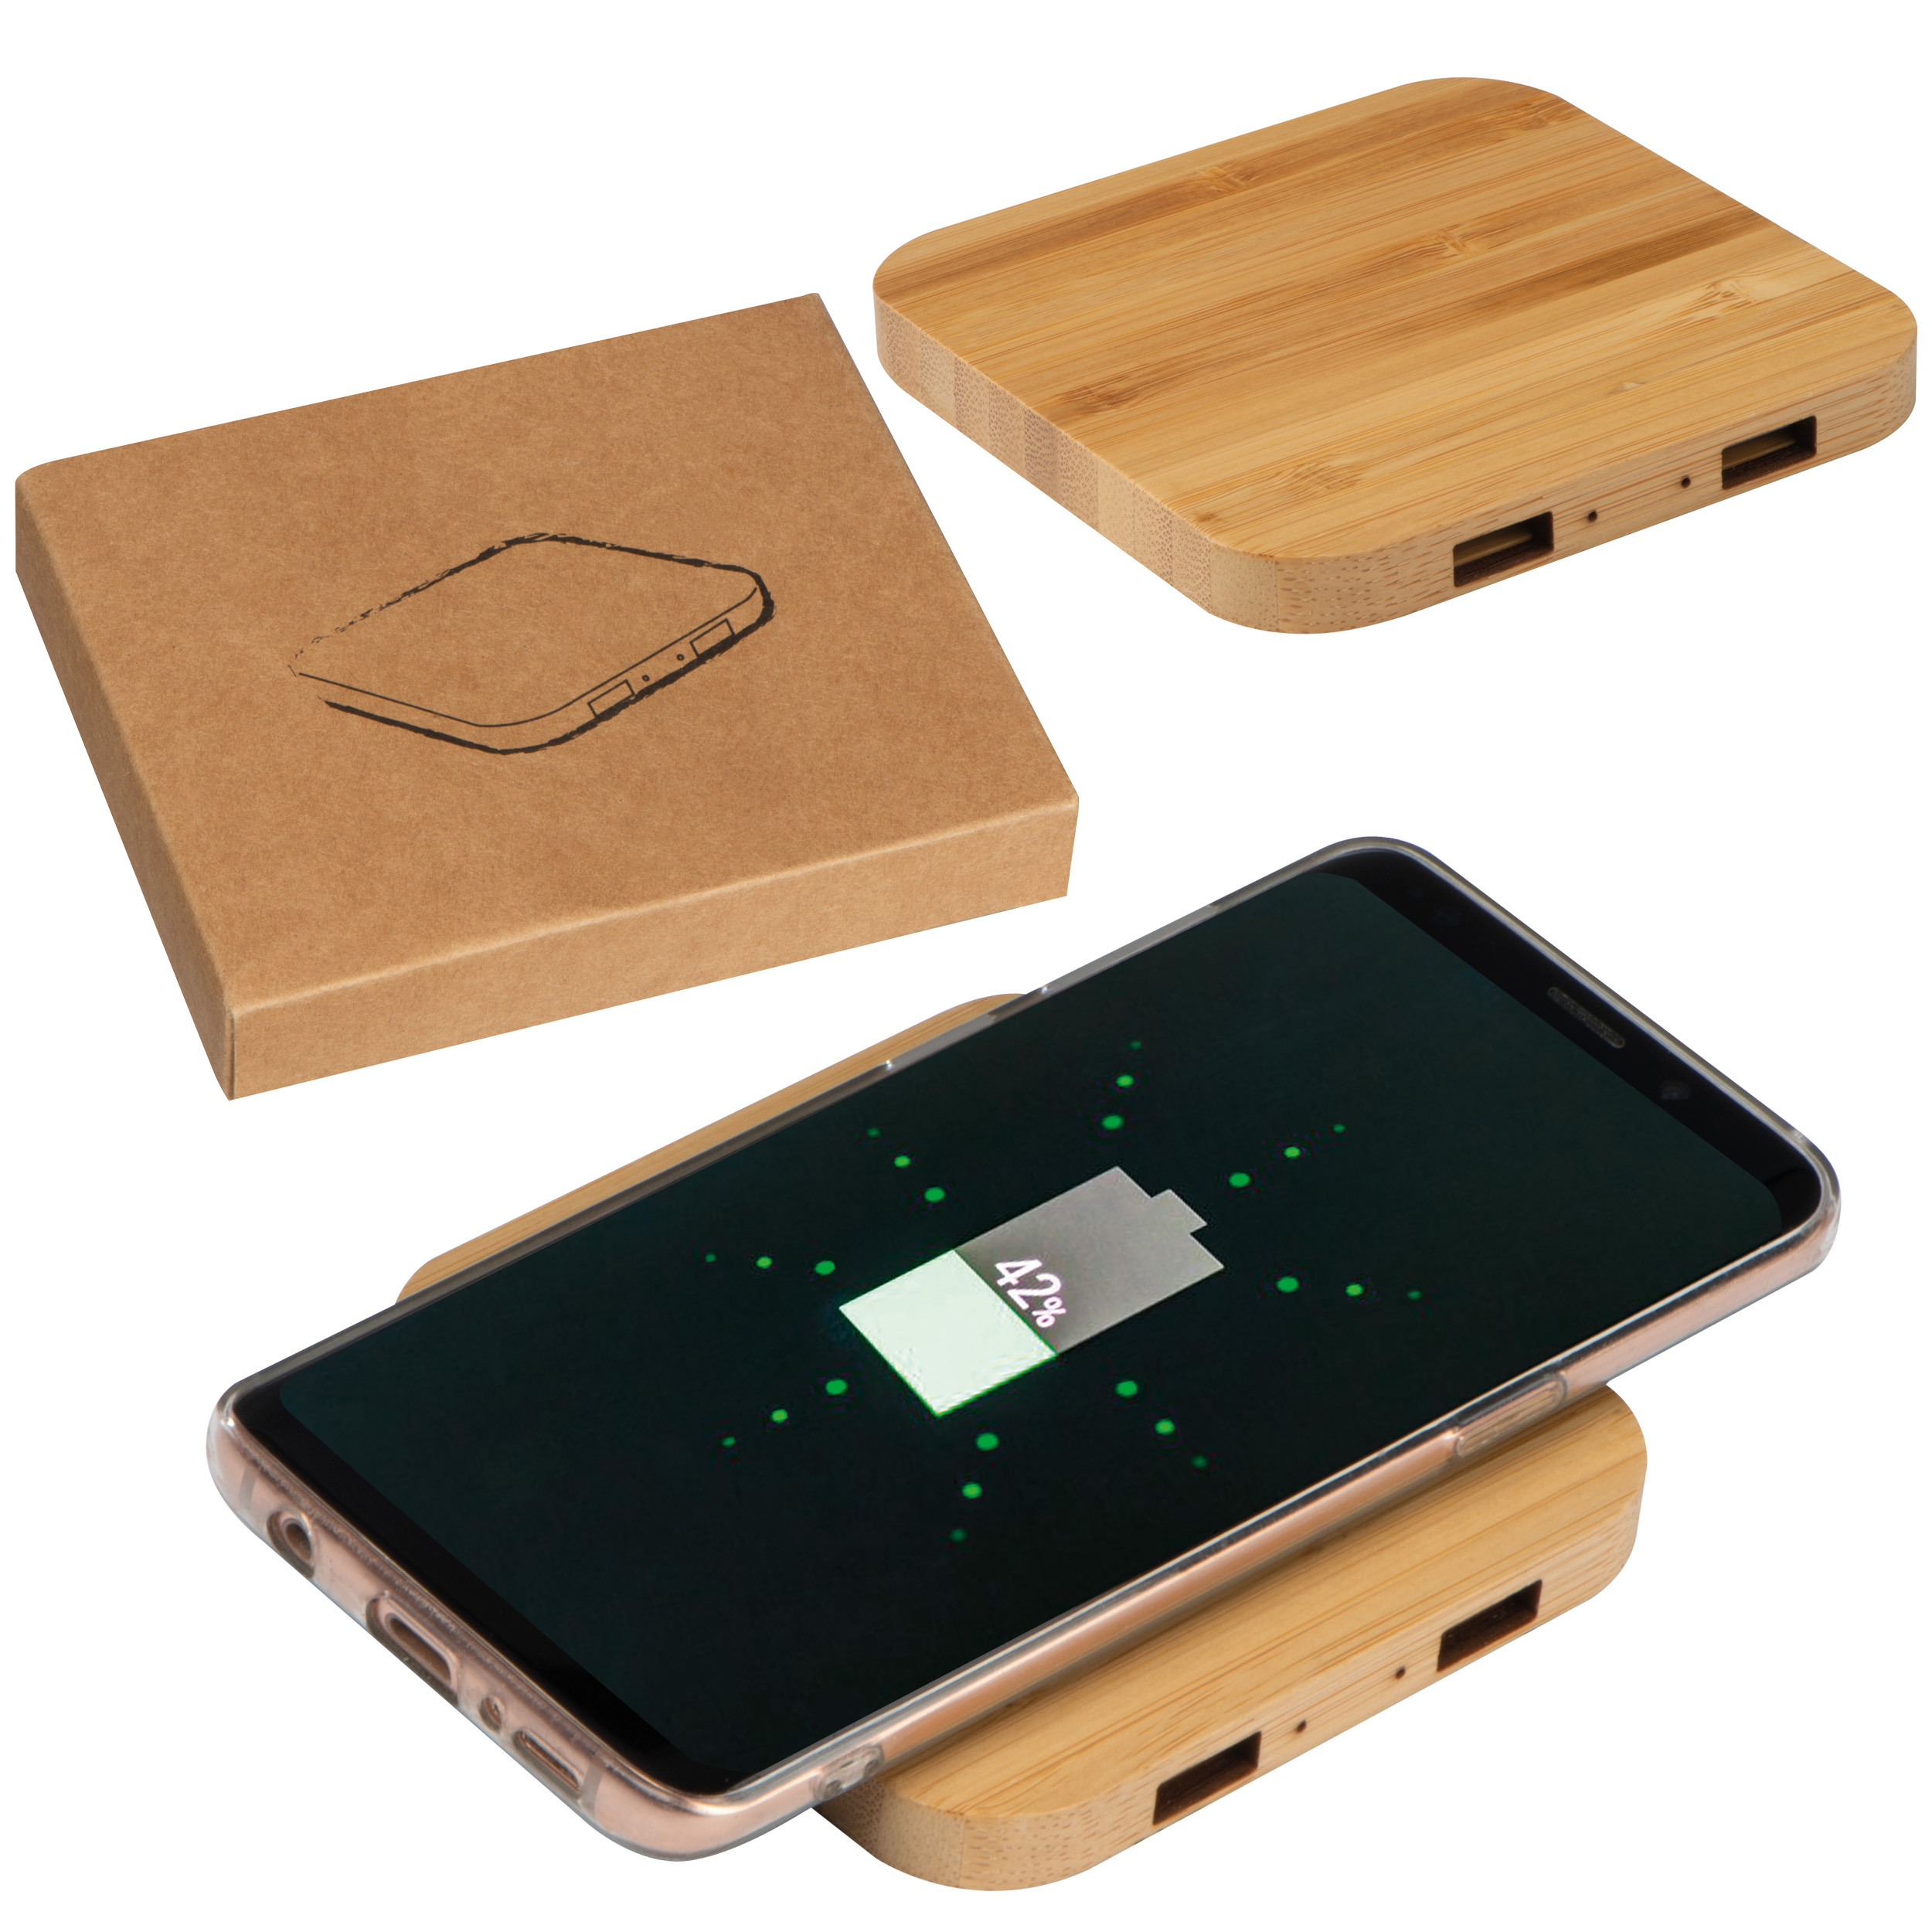 Bamboo Wireless Charger with 2 USB ports